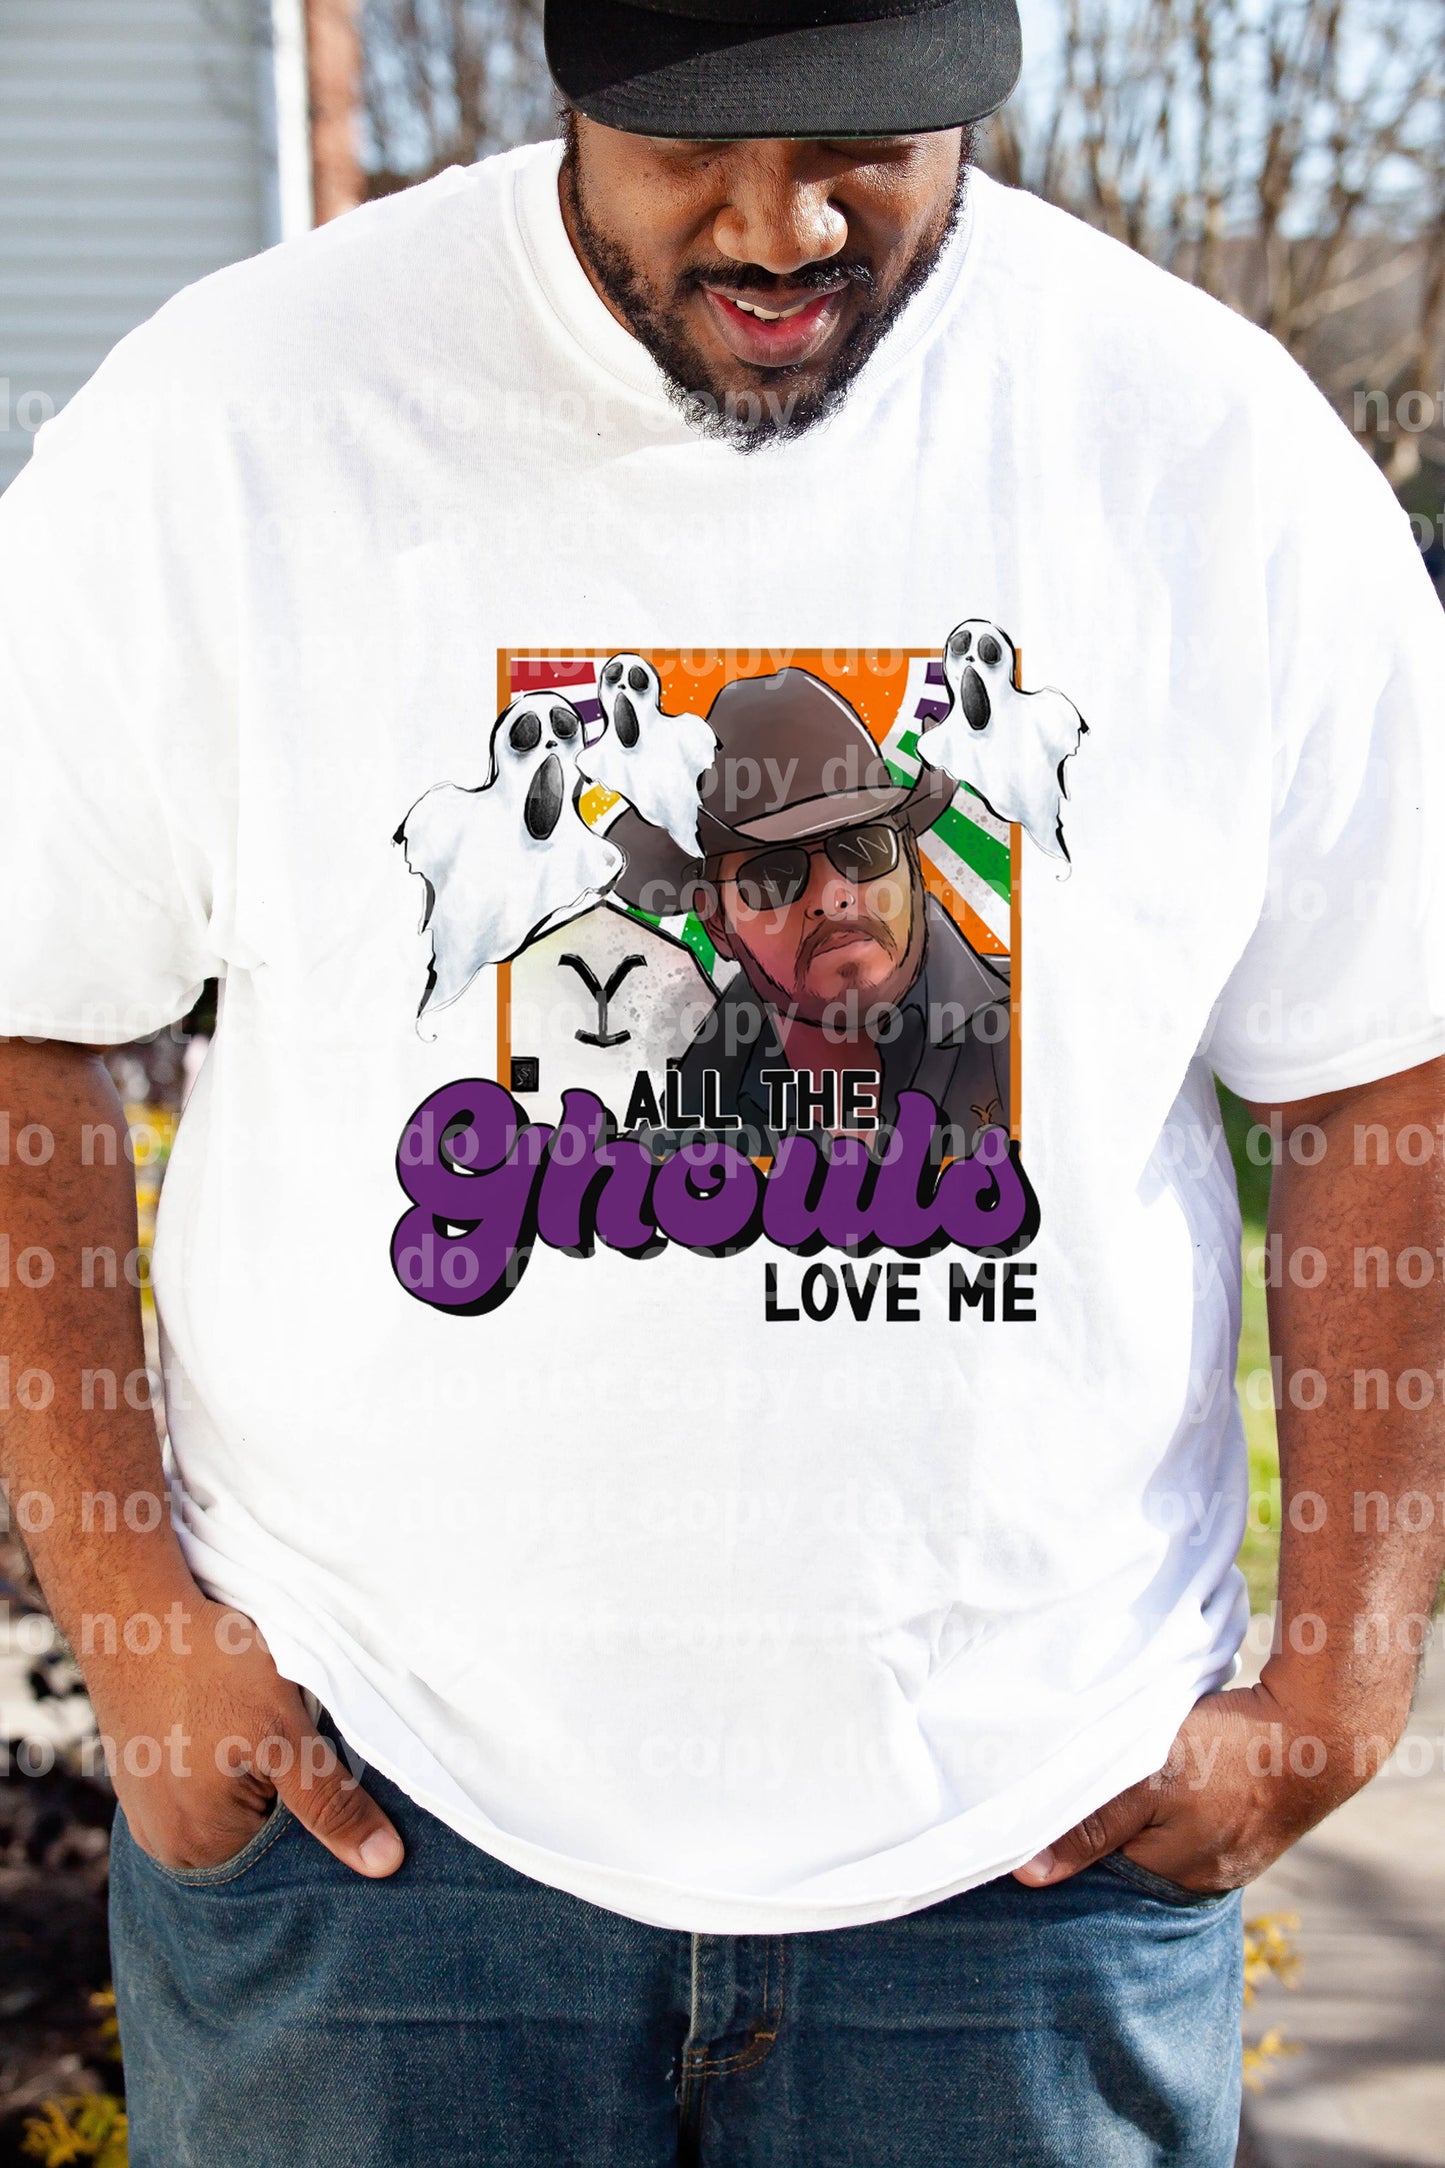 All The Ghouls Love Me Dream Print or Sublimation Print